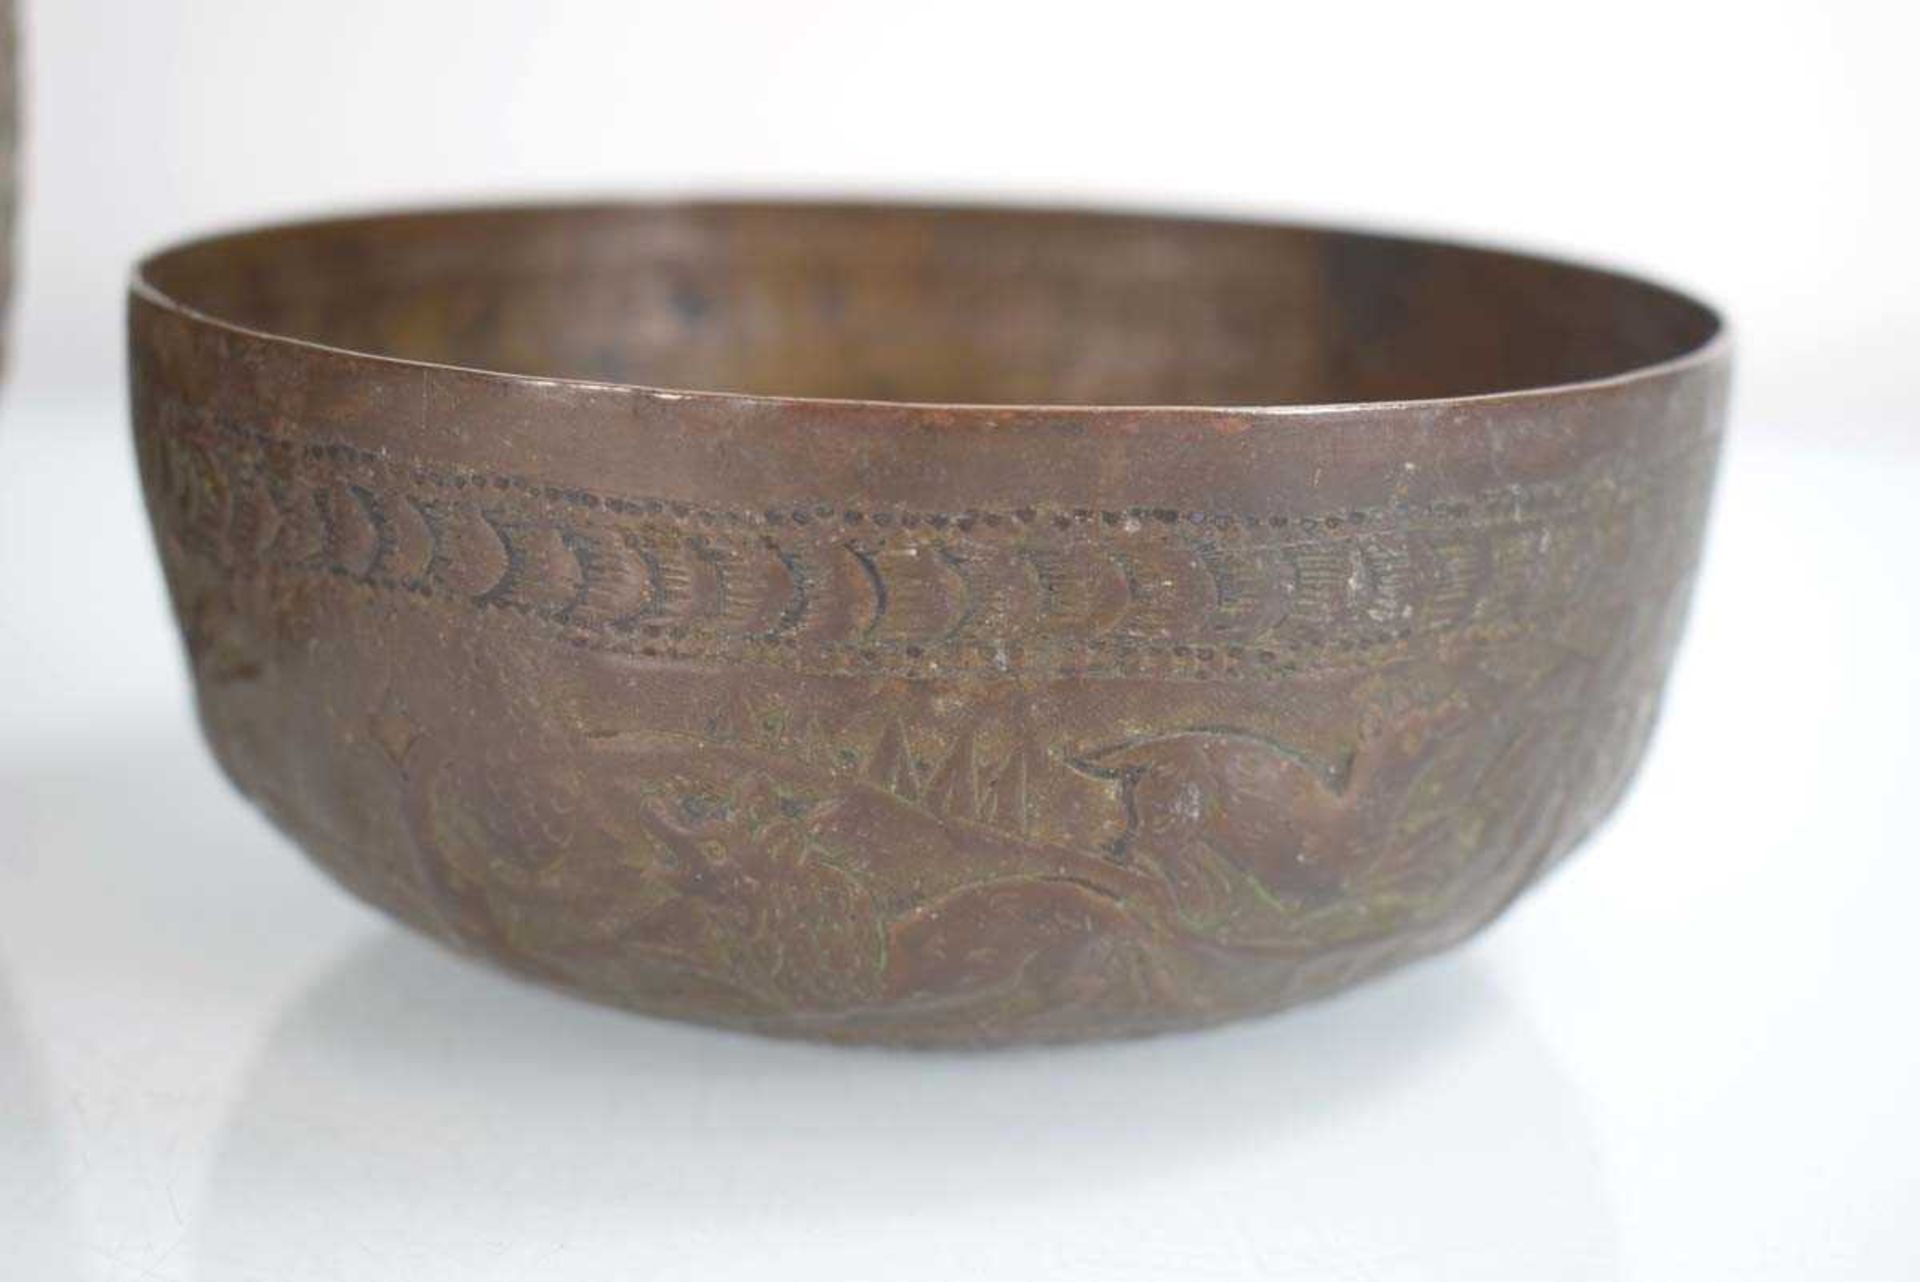 A South East Asian brass bowl relief decorated with figures in a garden landscape, di. 15.5 cm, h. - Image 2 of 4